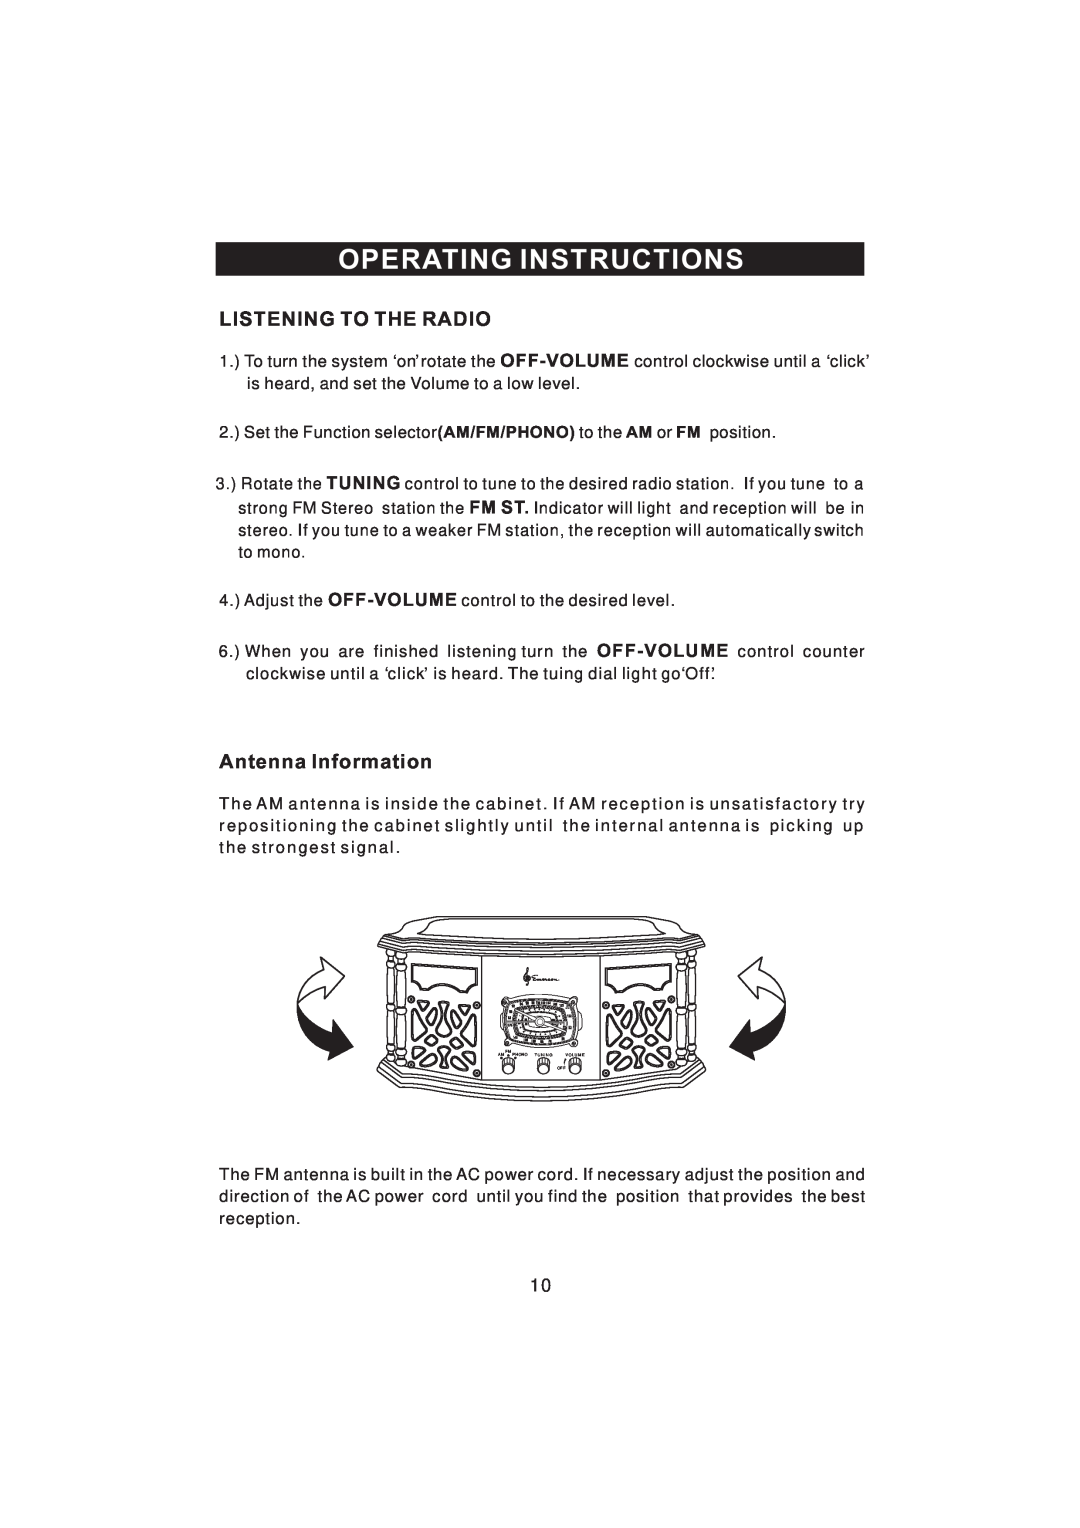 Emerson NR101TTC owner manual Operating Instructions, Listening To The Radio, Antenna Information 